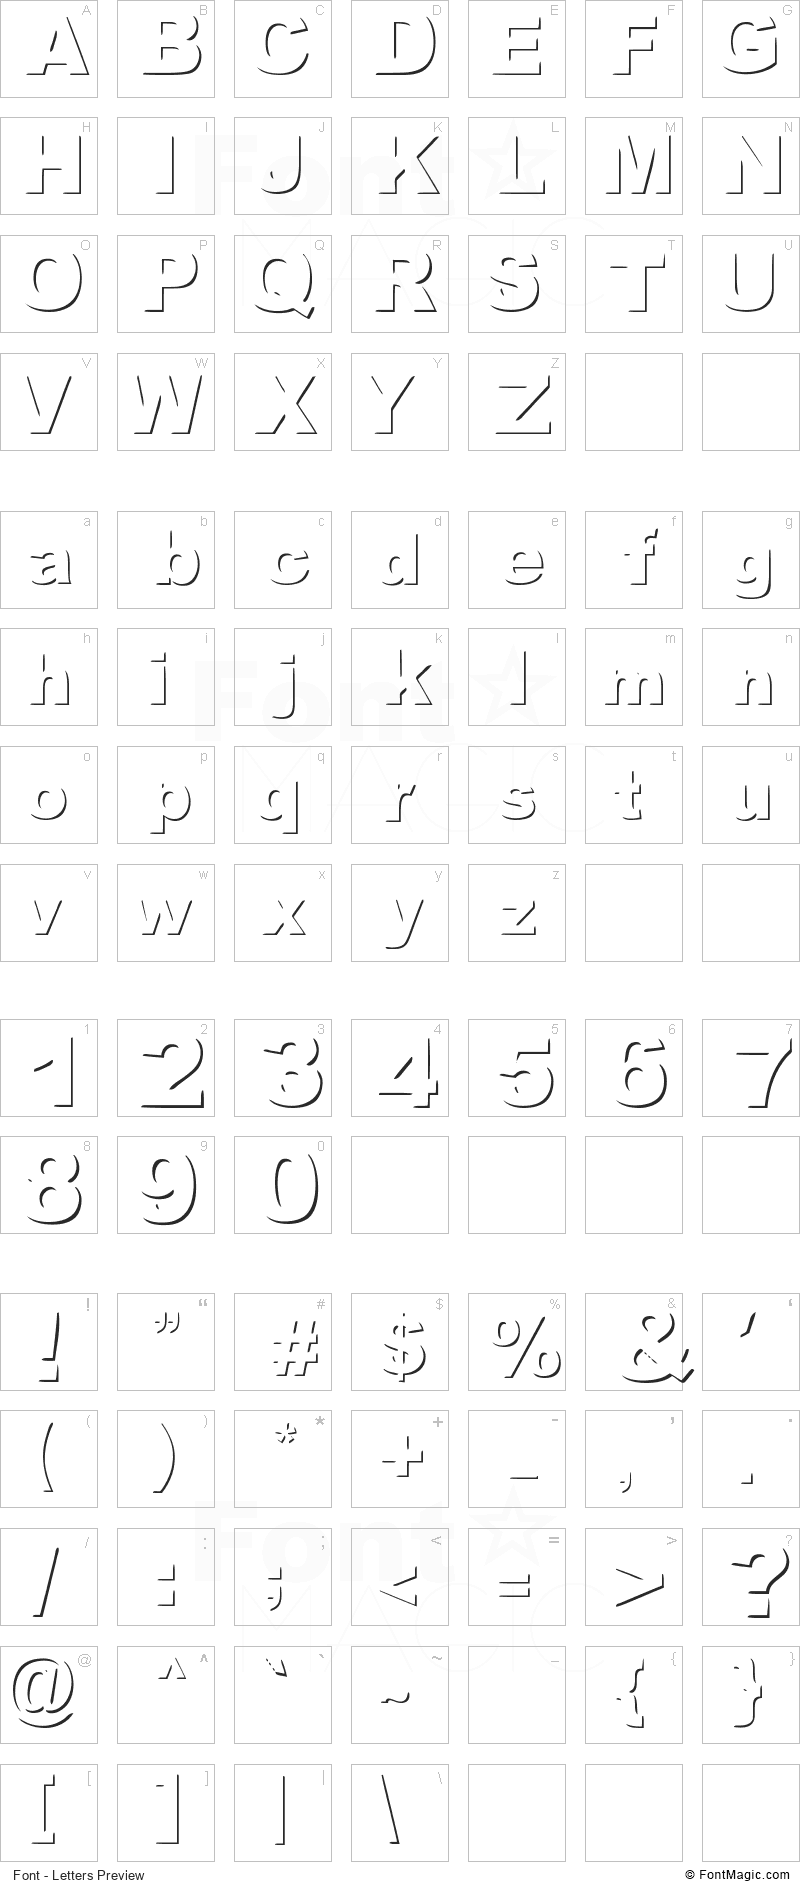 Woodcutter Invisible Font - All Latters Preview Chart